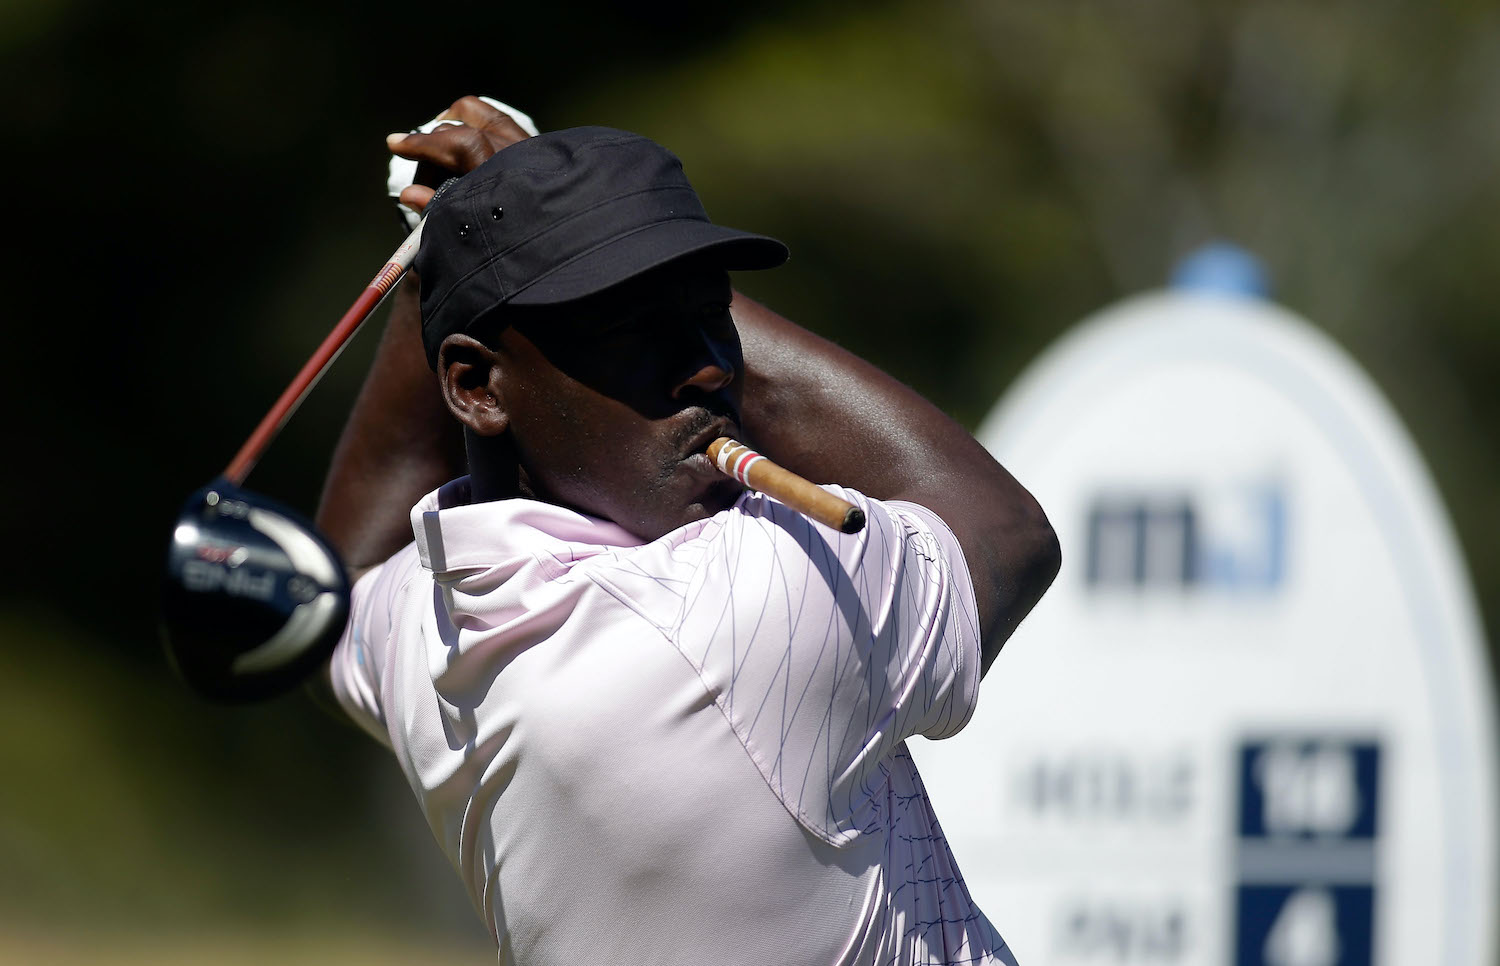 Michael Jordan takes a swing on the golf course.